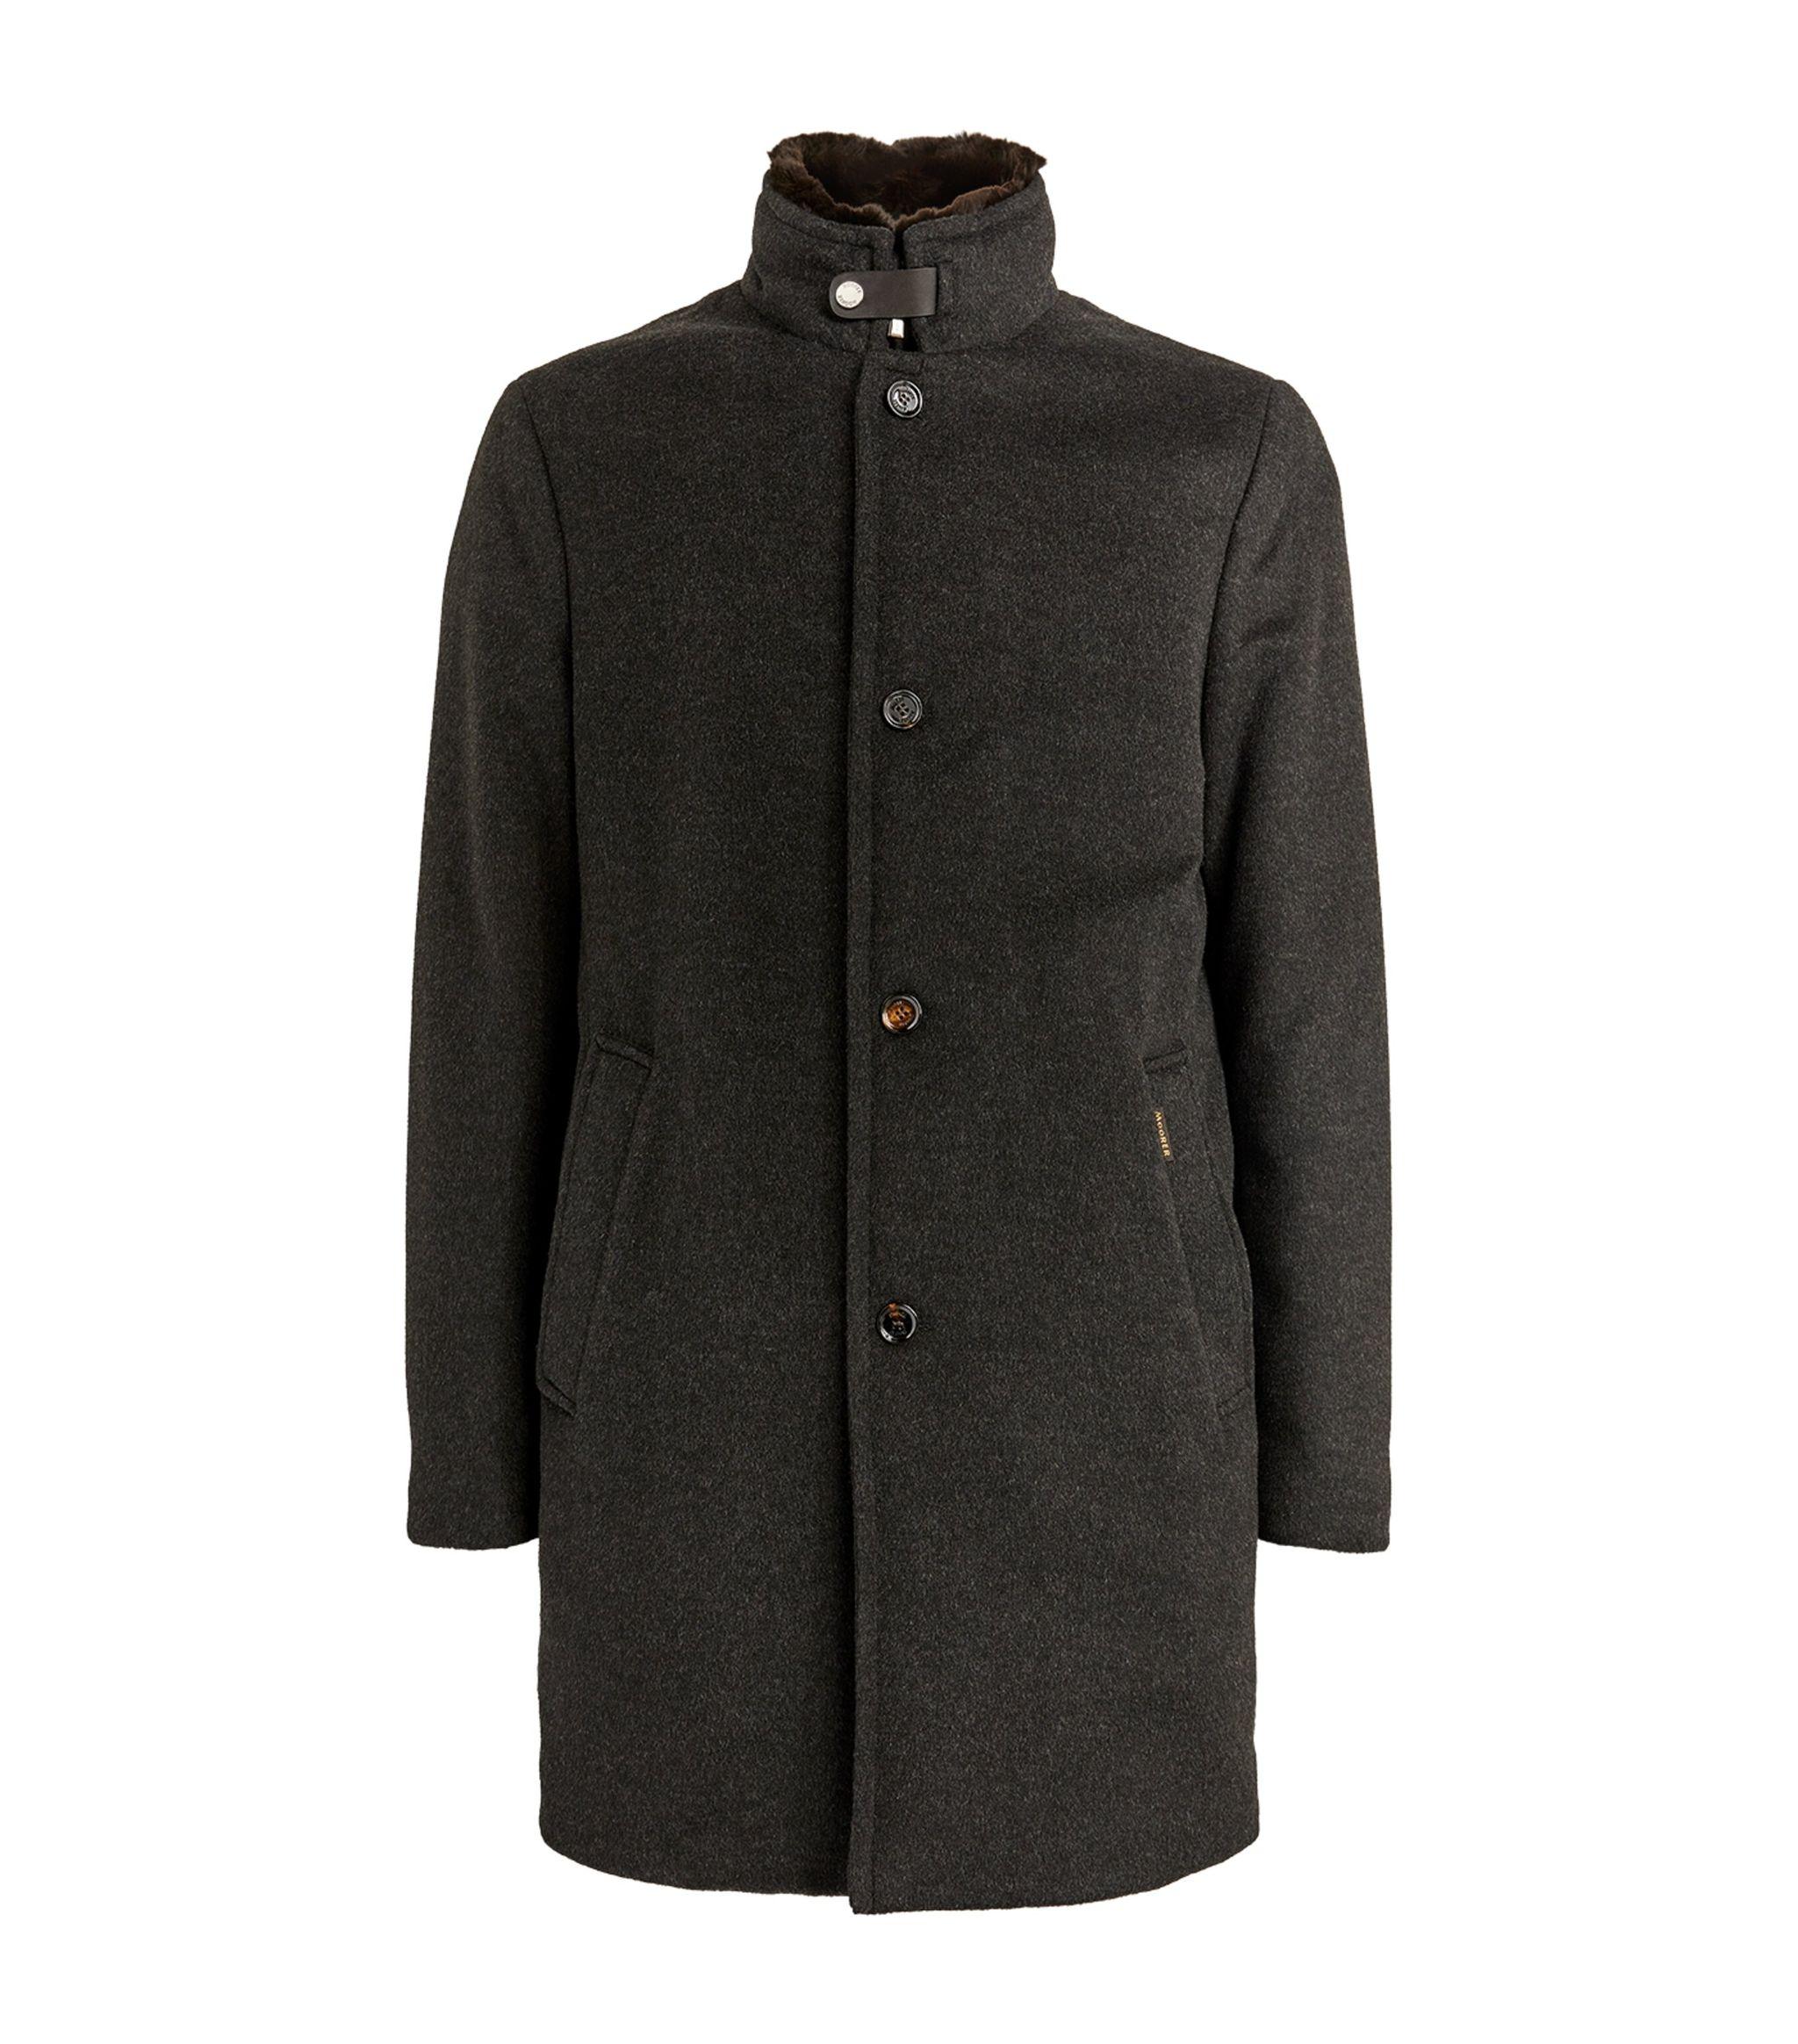 Moorer Wool-cashmere Quilted Coat in Black for Men - Lyst